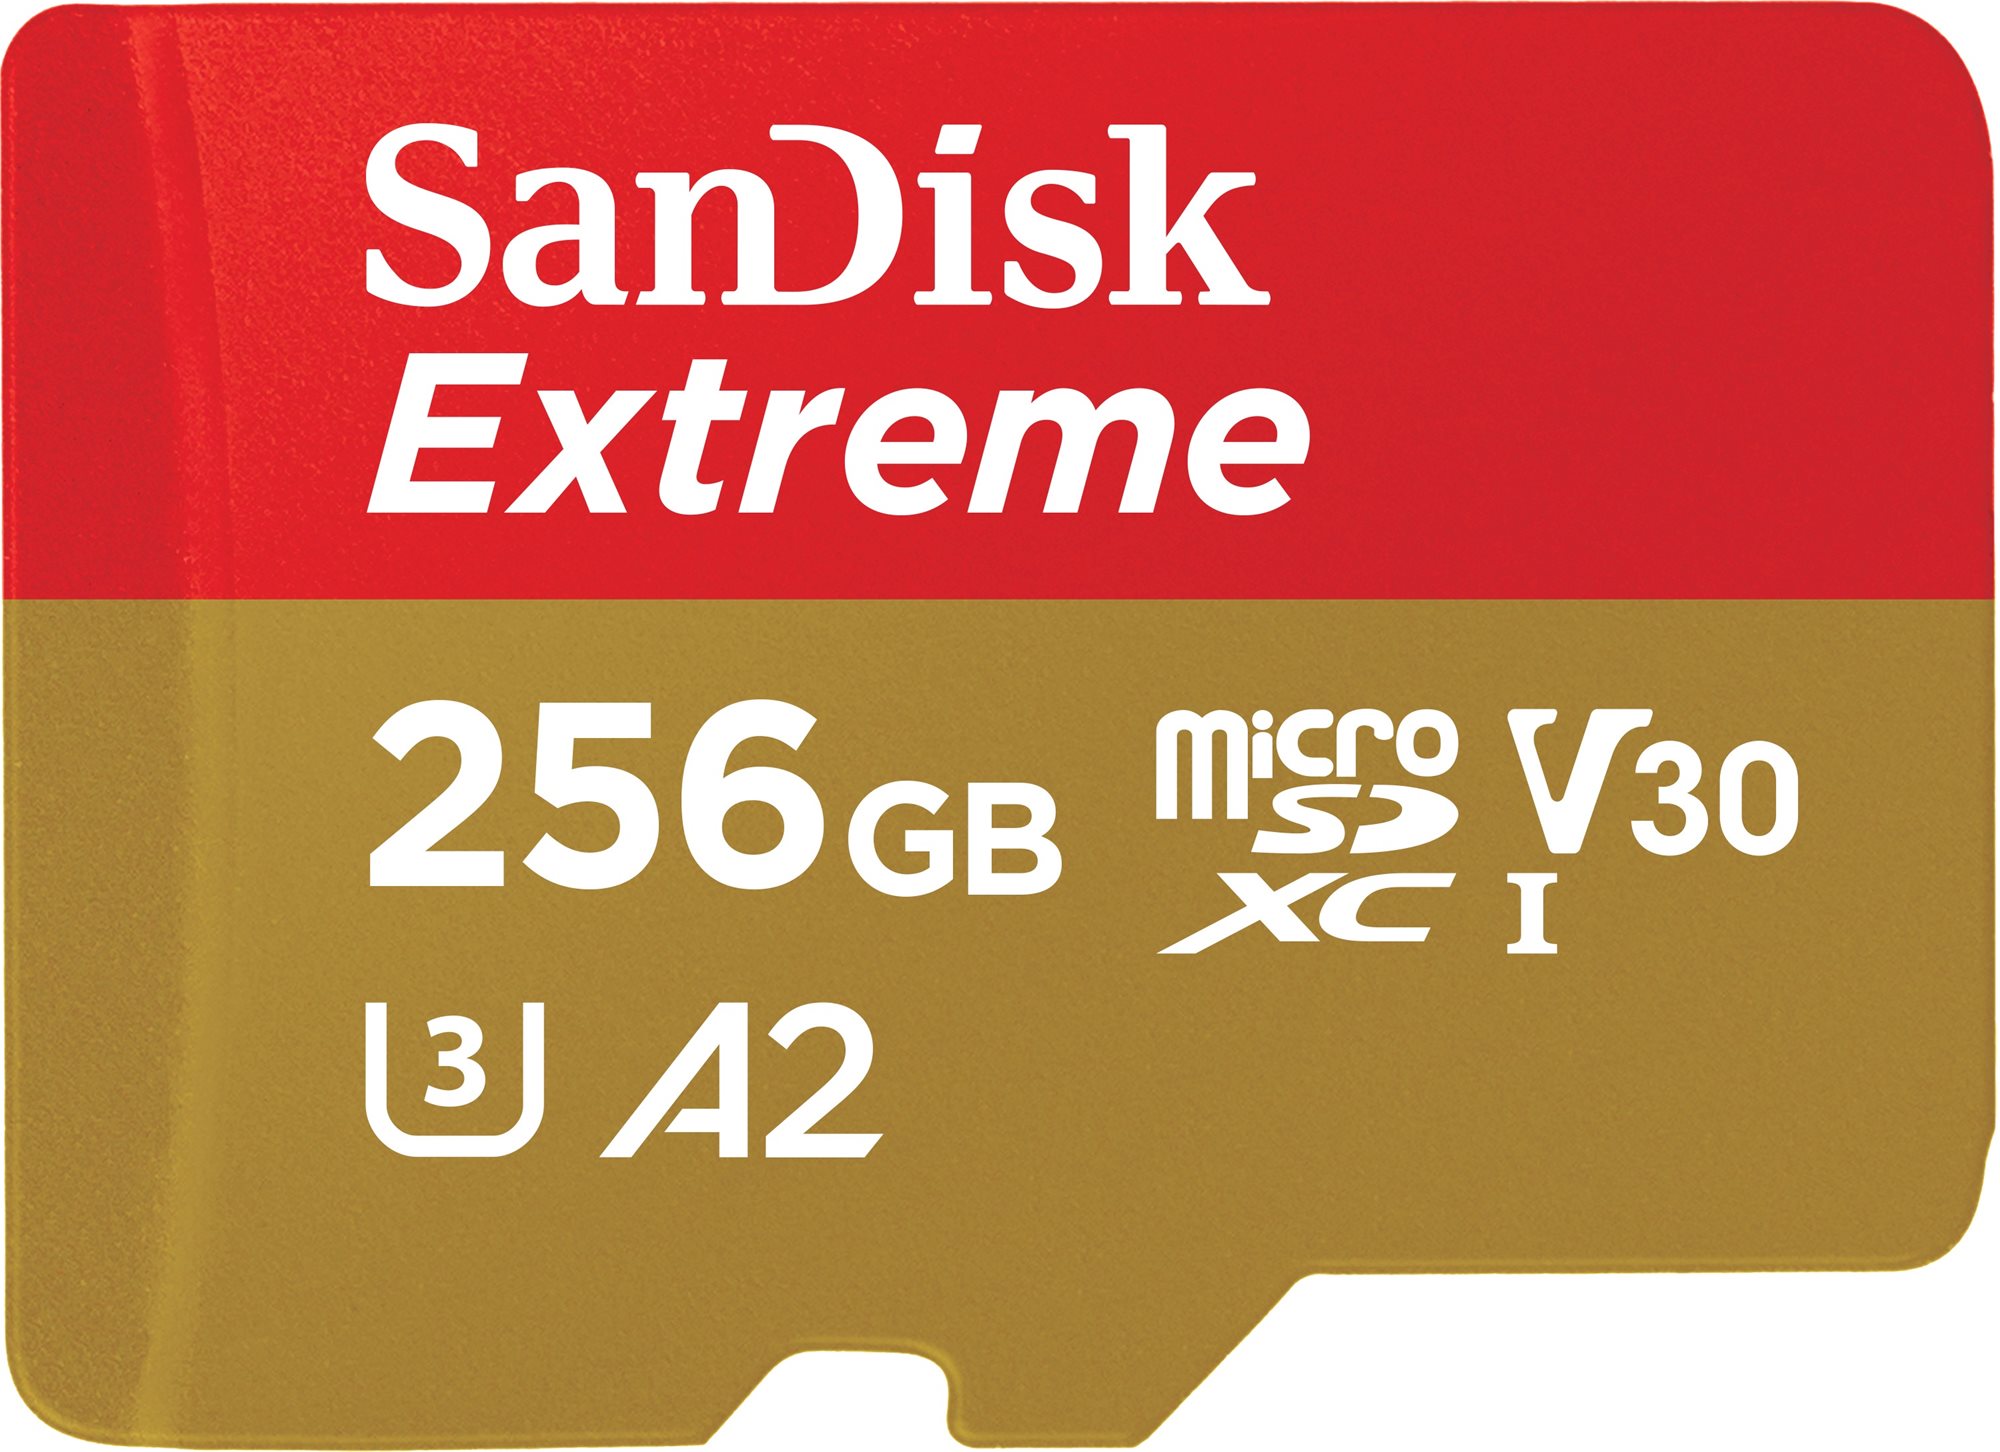 SanDisk microSDXC 256 GB Extreme Mobile Gaming + Rescue PRO Deluxe